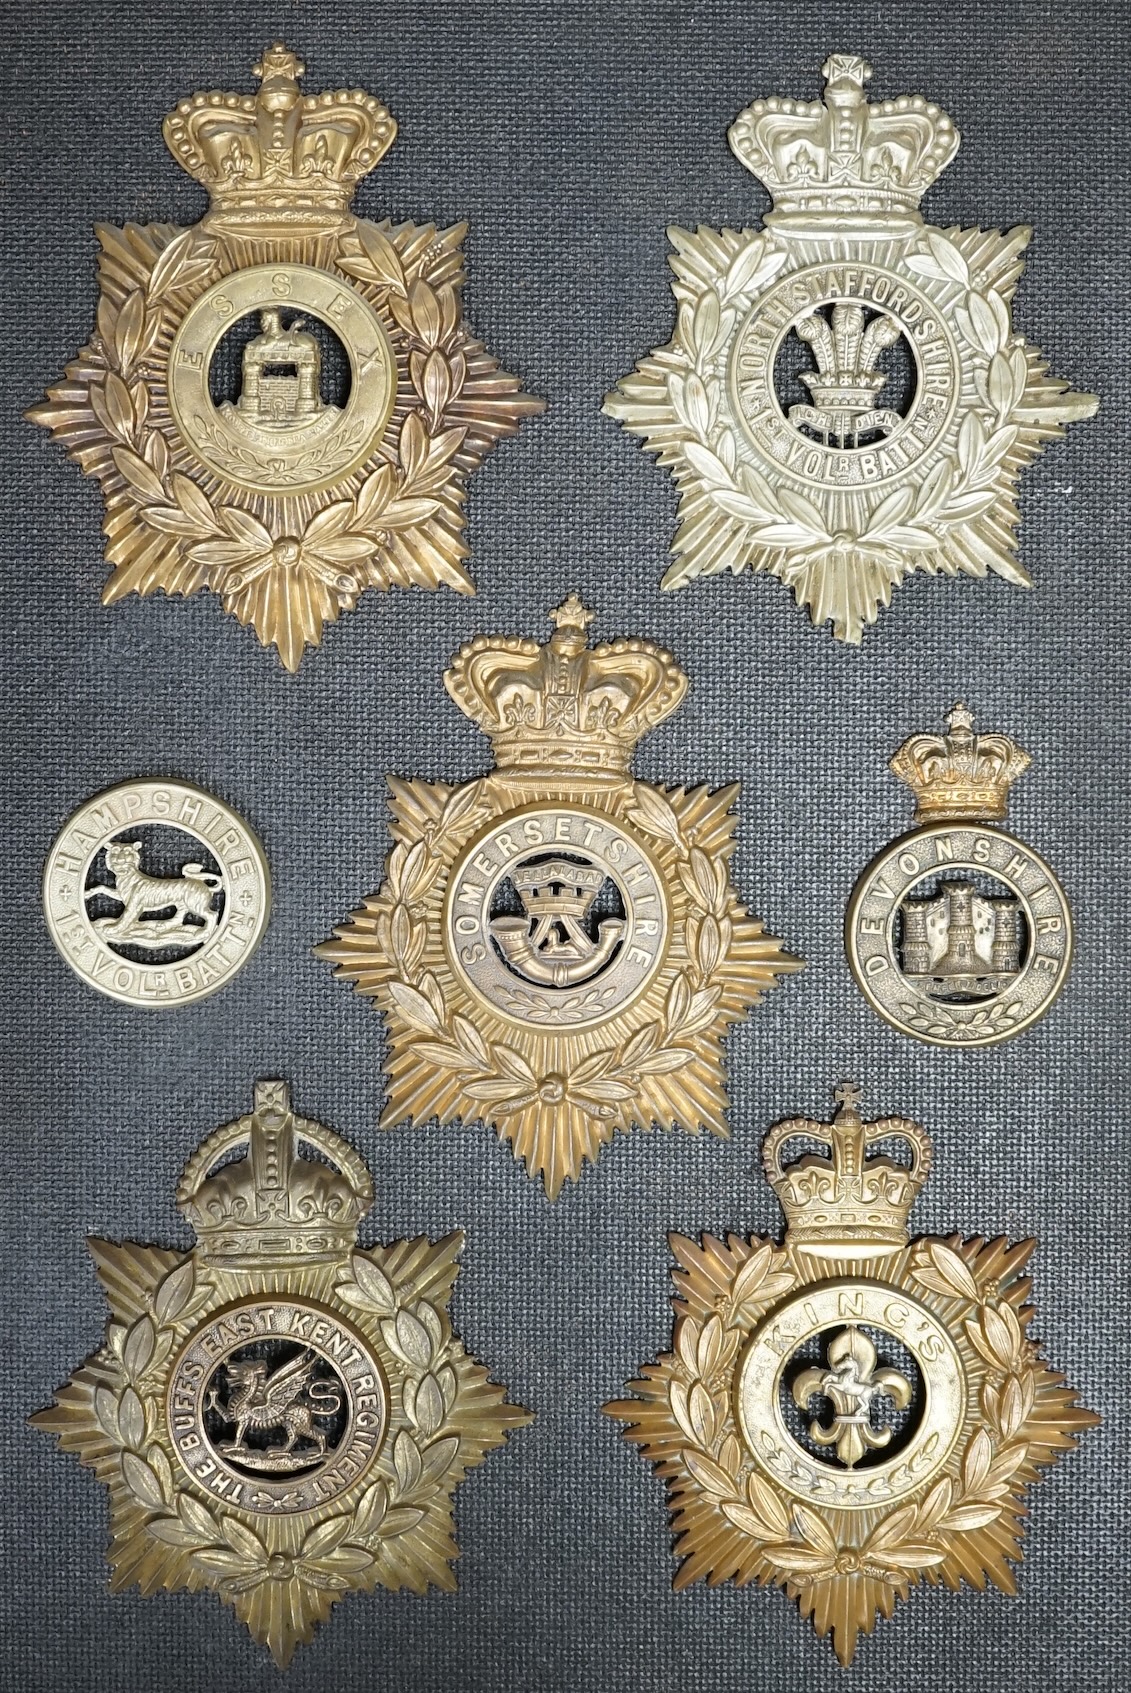 Five military helmet plates and two other centre badges, mounted on a board including; the Essex Regiment, the North Staffordshire 1st Volunteer Battalion, the Somerset Regiment, the Buffs East Kent Regiment, the King’s